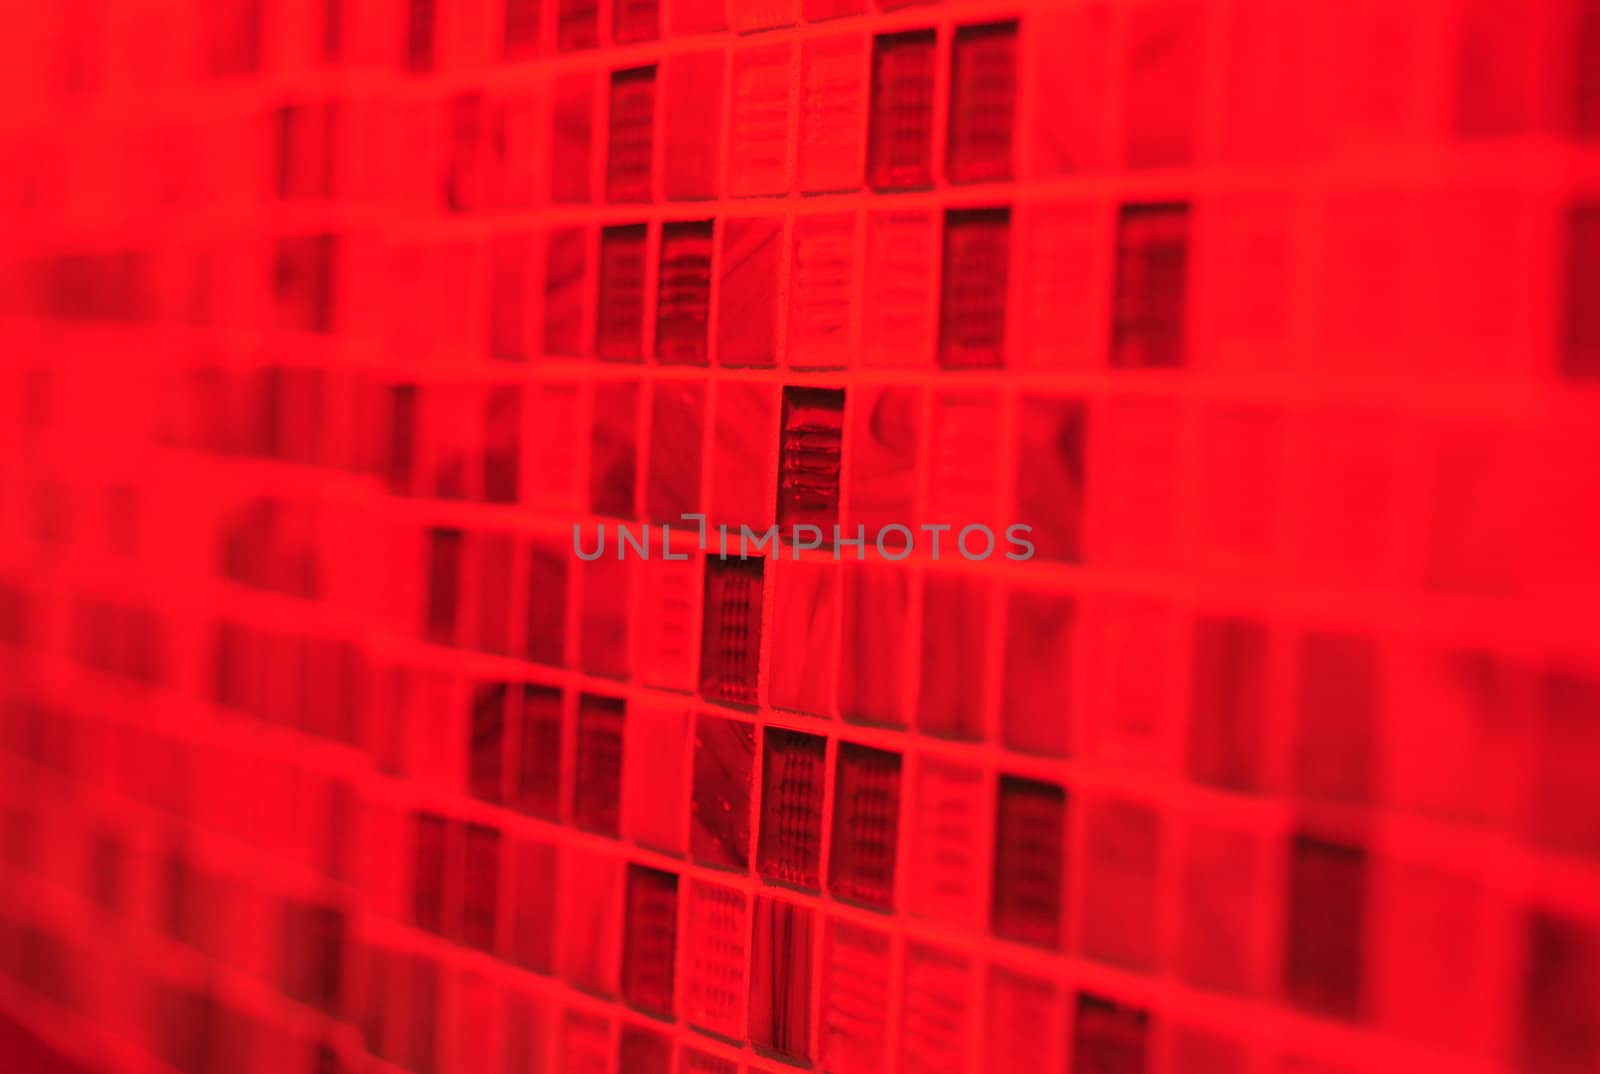 Red square abstract background by ftlaudgirl